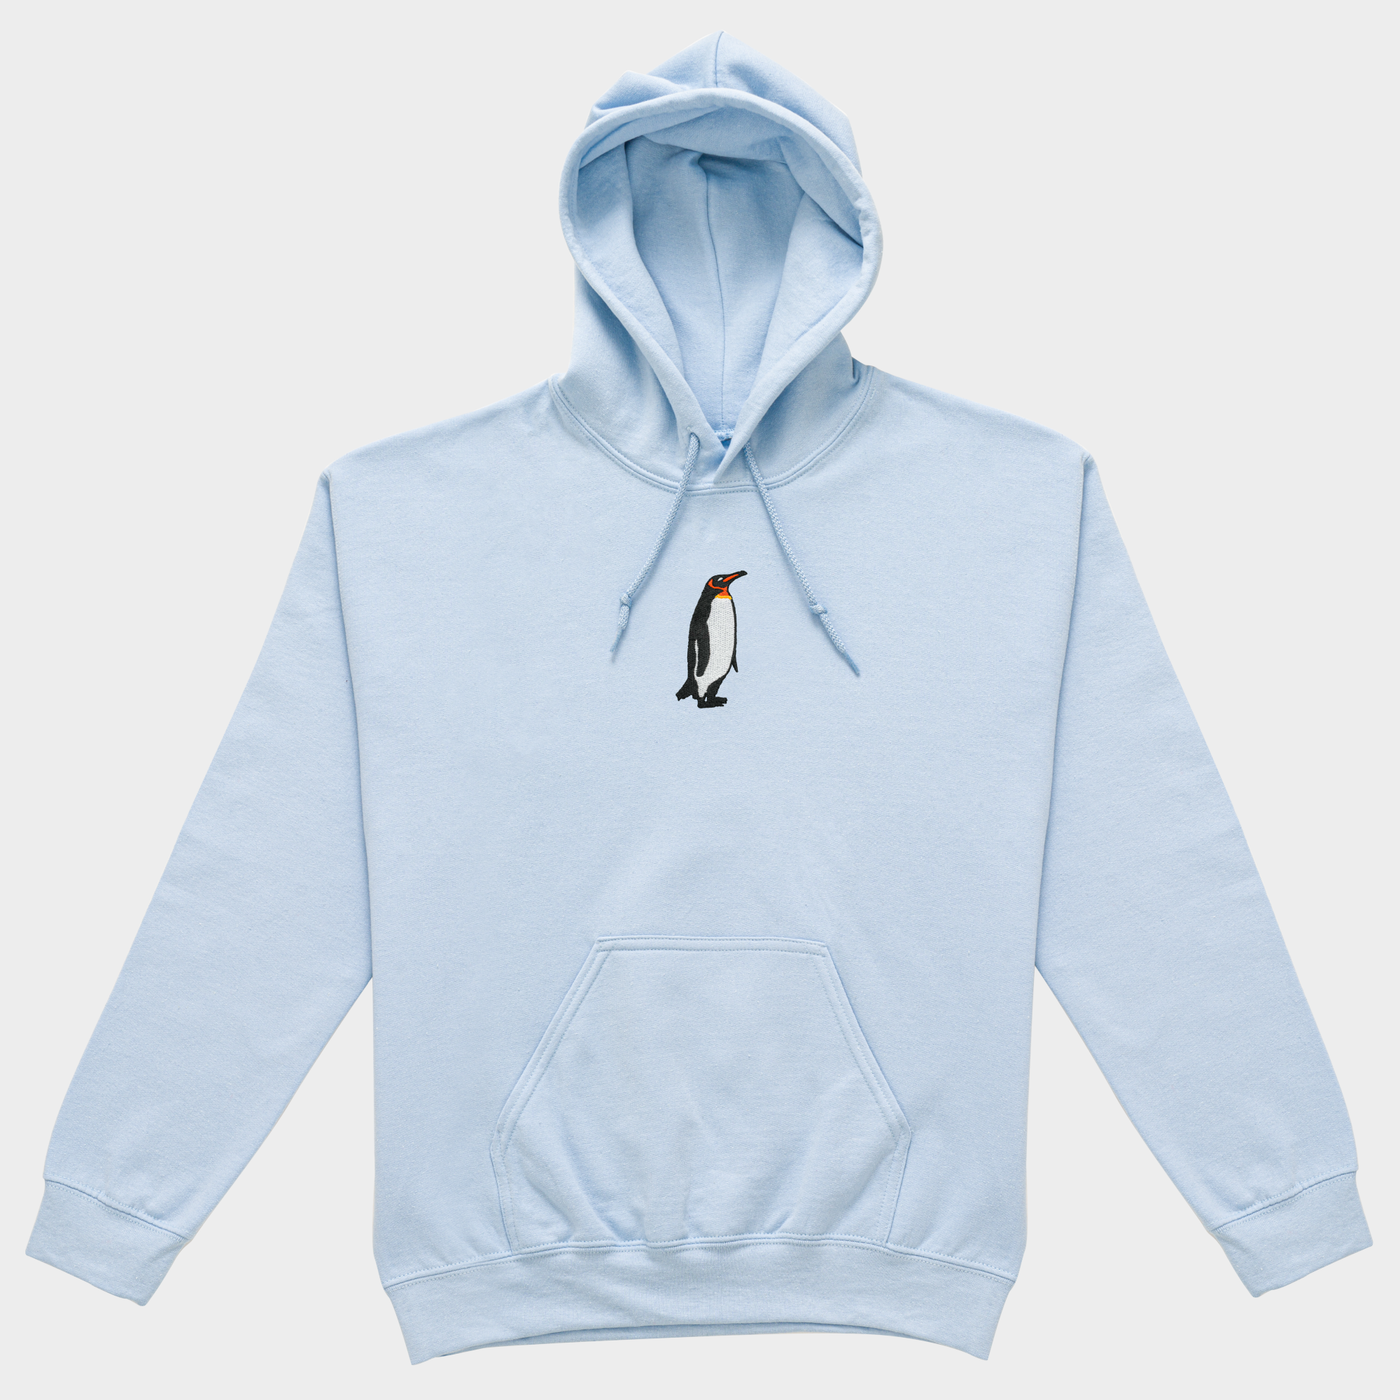 Bobby's Planet Women's Embroidered Penguin Hoodie from Arctic Polar Animals Collection in Light Blue Color#color_light-blue